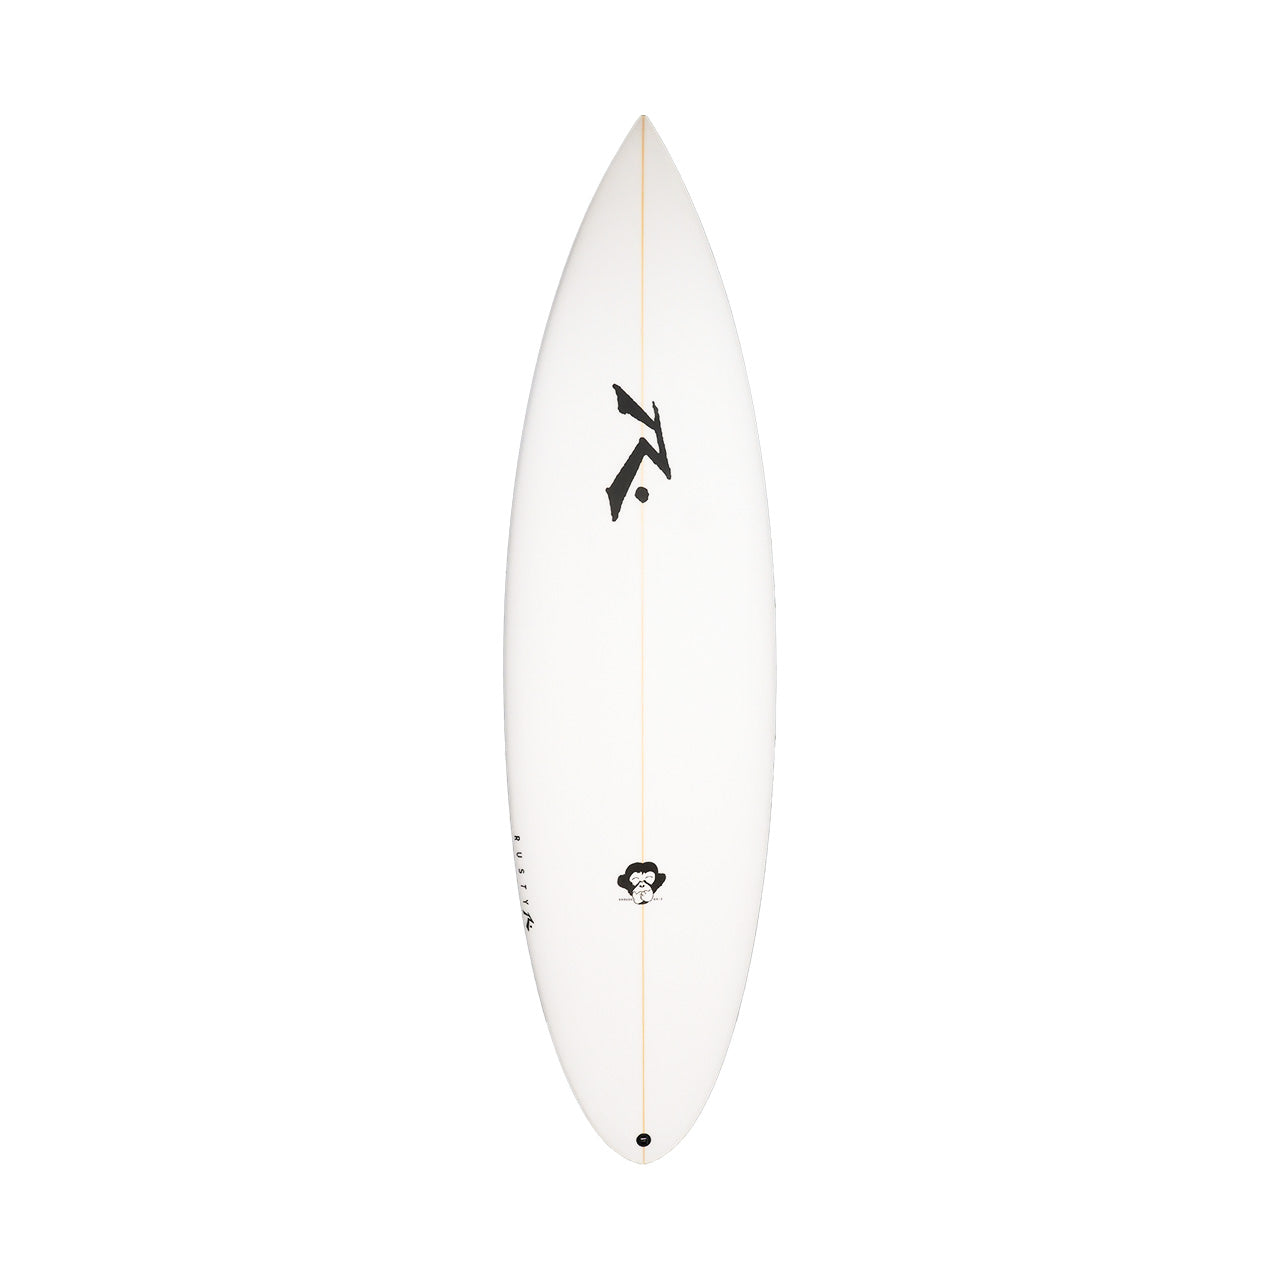 Enough Said High Performance Shortboard - In Stock - Deck View - Rusty Surfboards